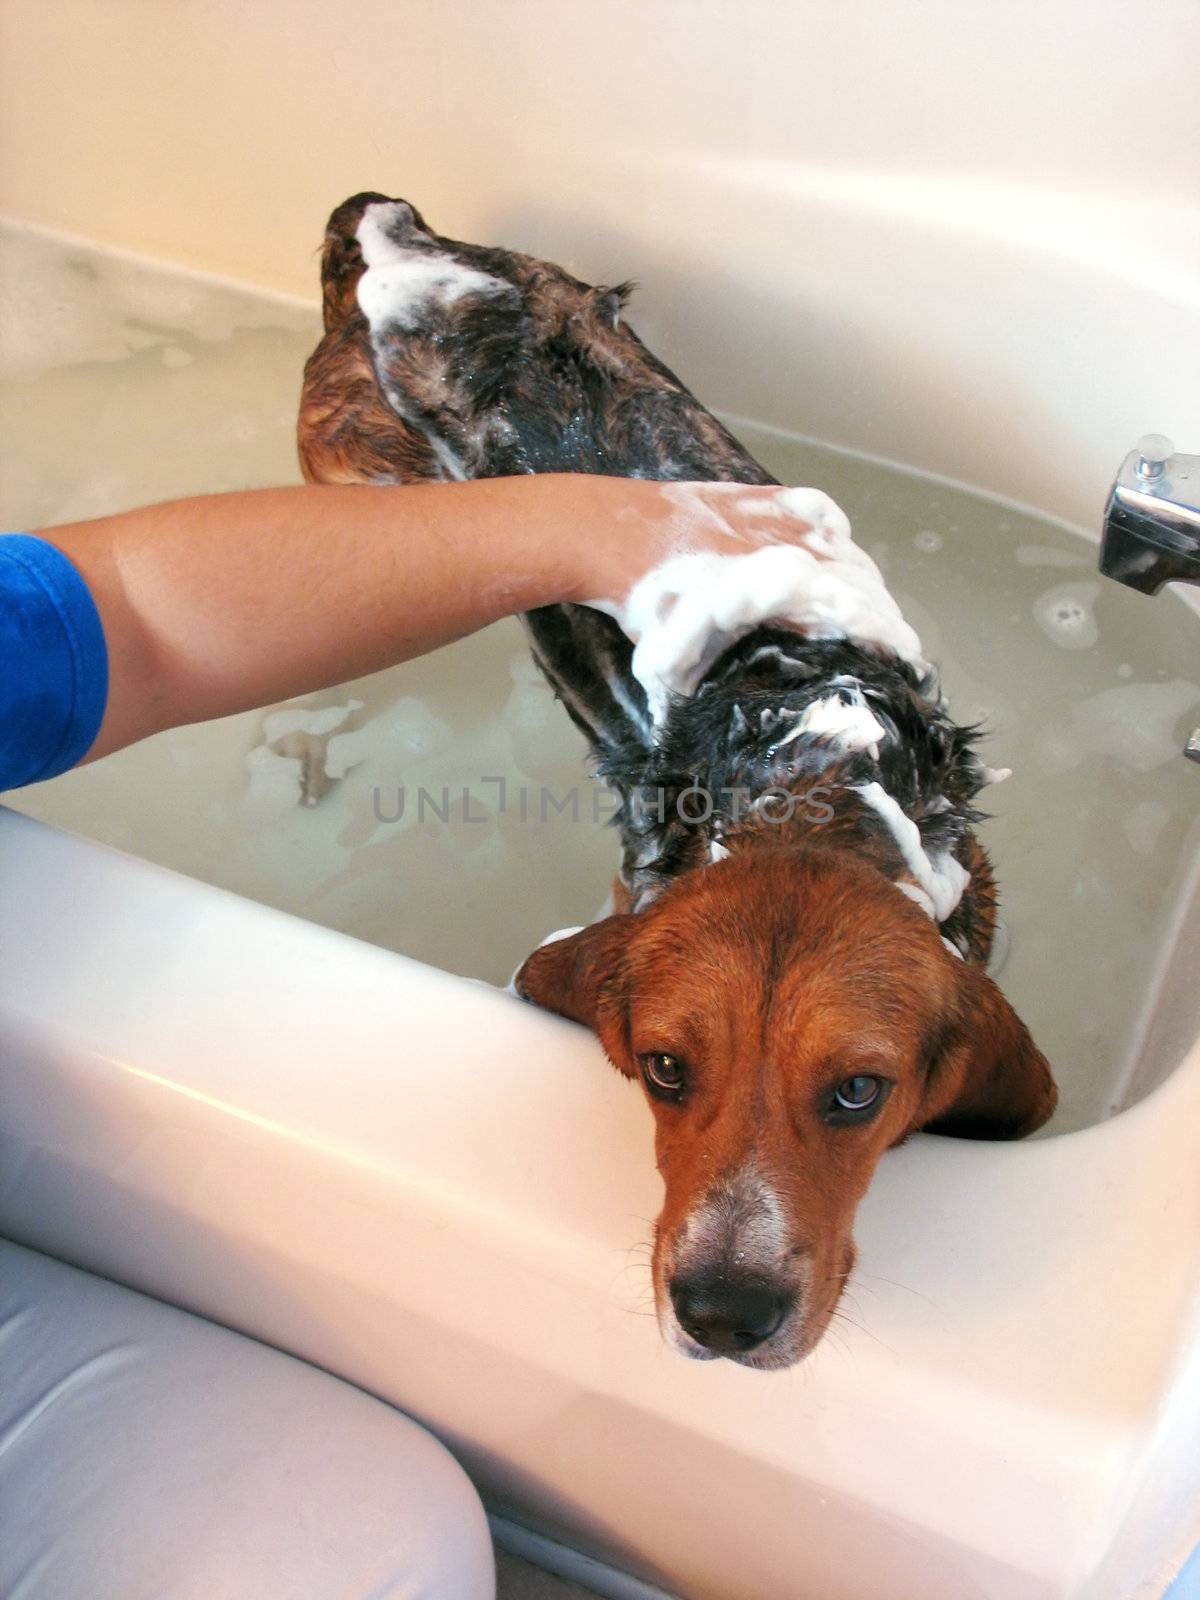 A cute beagle in the tub getting a bath - he looks like he really wants to get out of there.